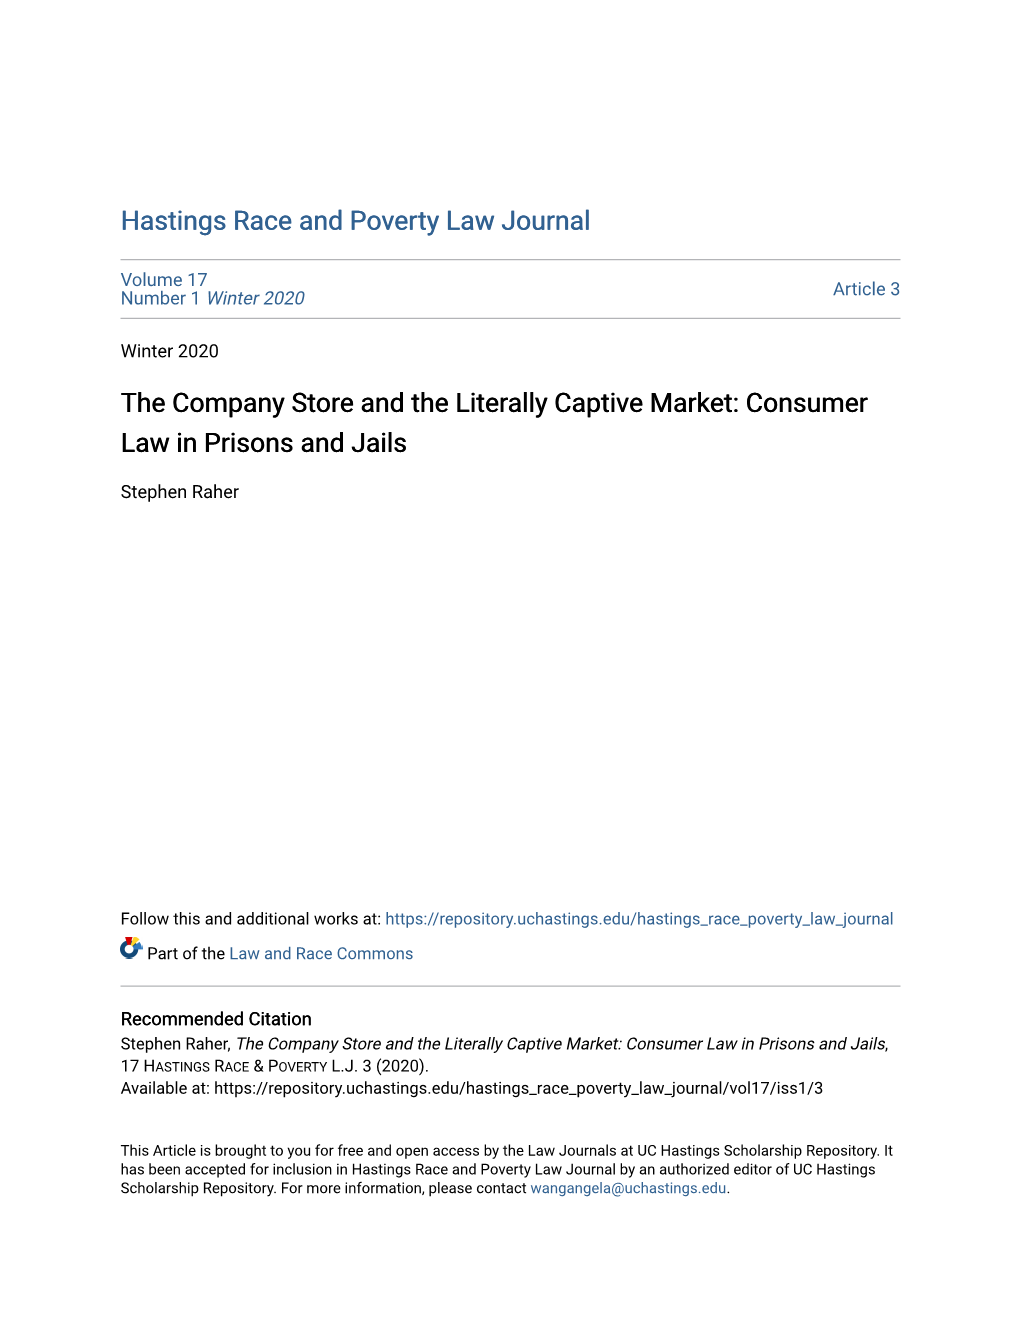 The Company Store and the Literally Captive Market: Consumer Law in Prisons and Jails